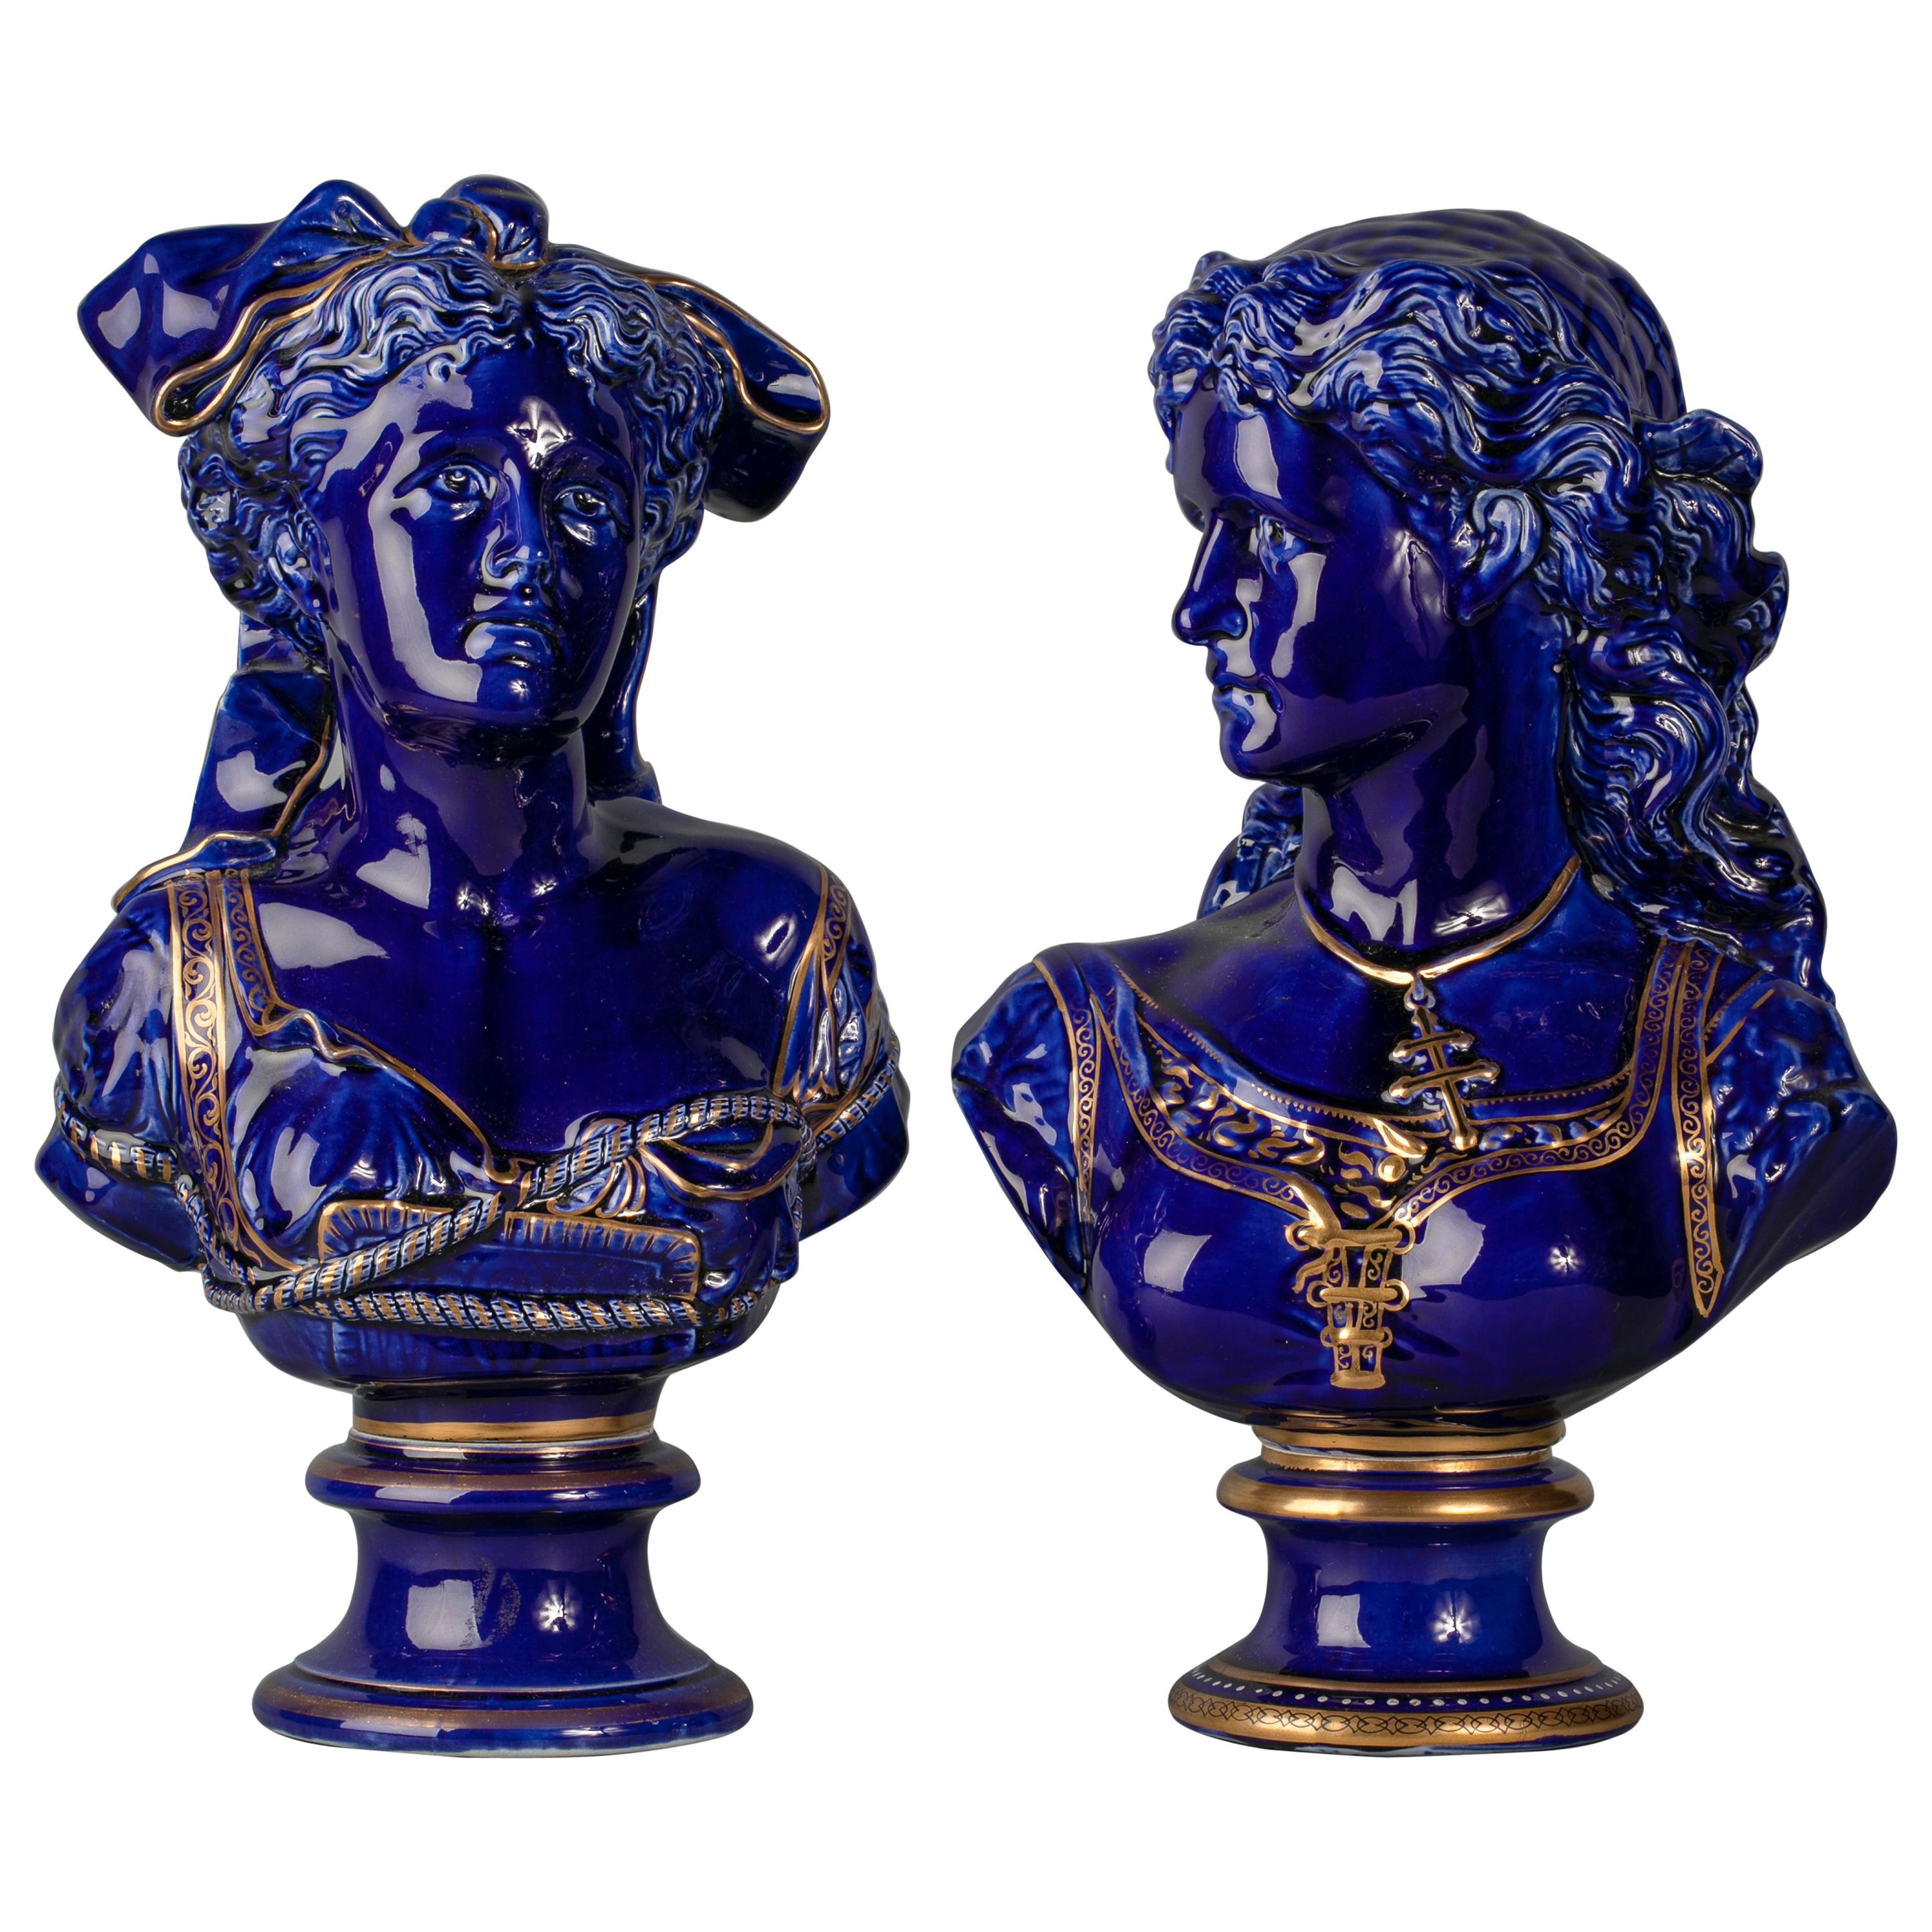 Pair of French Porcelain Blue and Gilt Busts of Woman, circa 1880